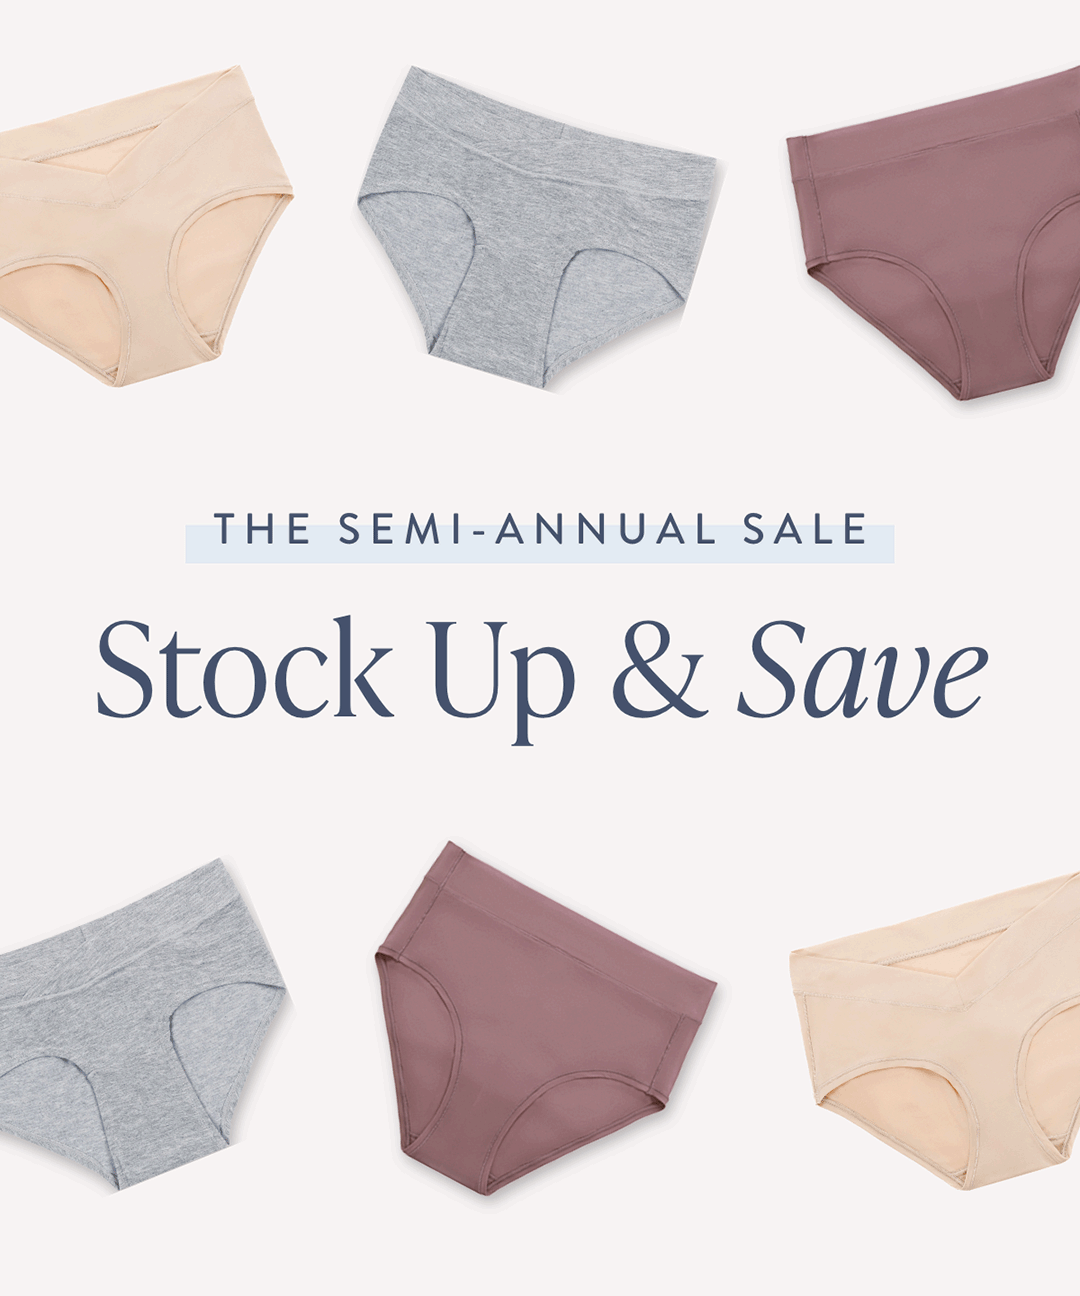 The Semi-Annual Sale: Stock Up & Save